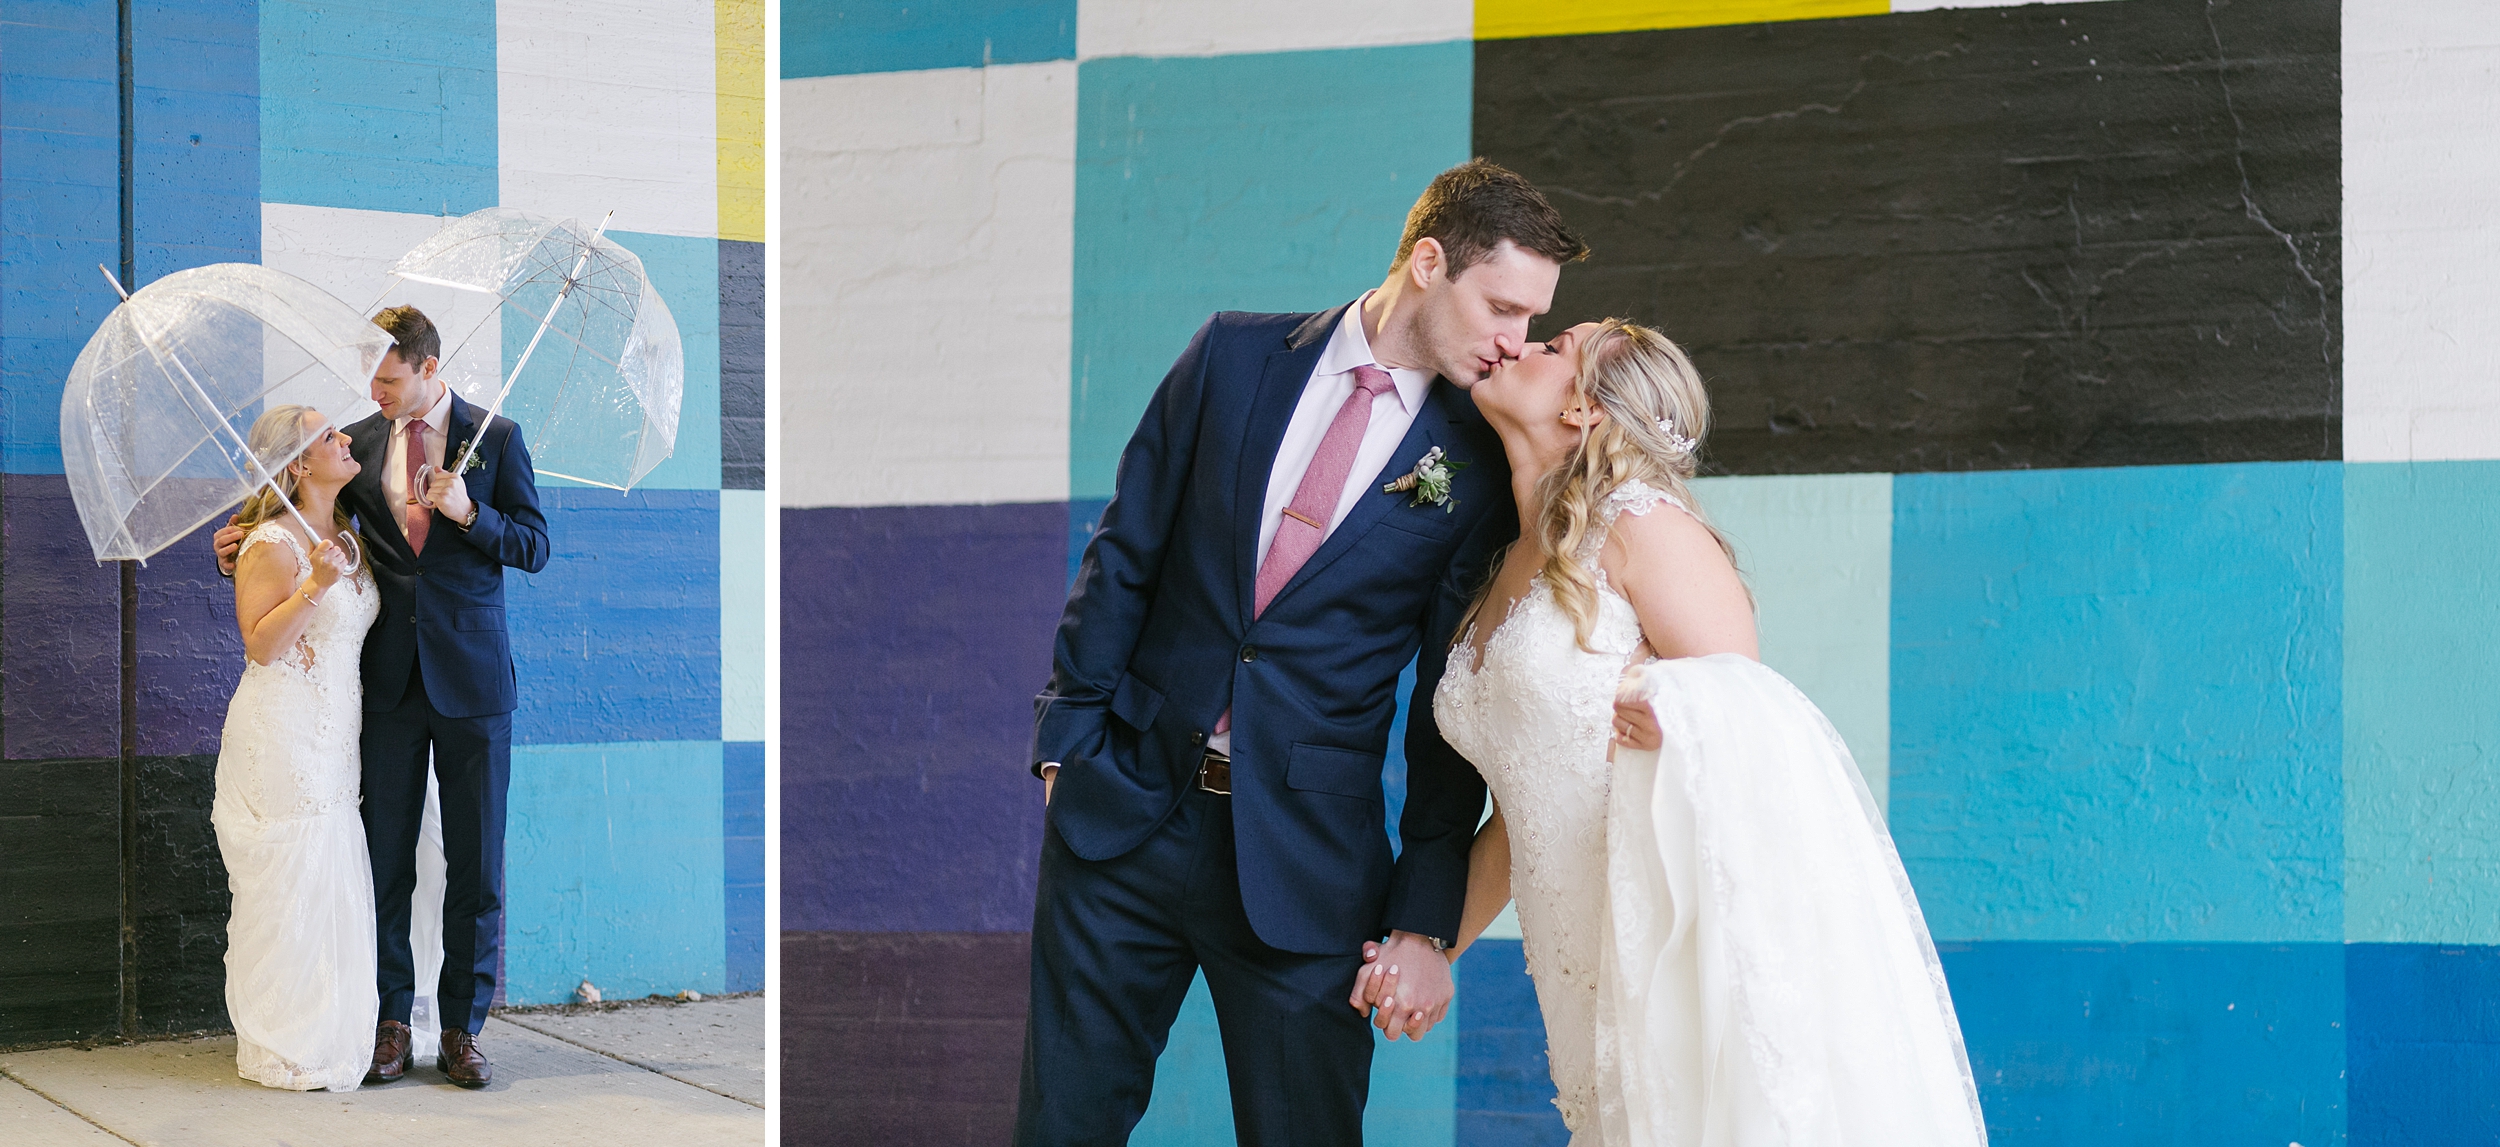 rainy day chicago wedding photos with mural backdrop